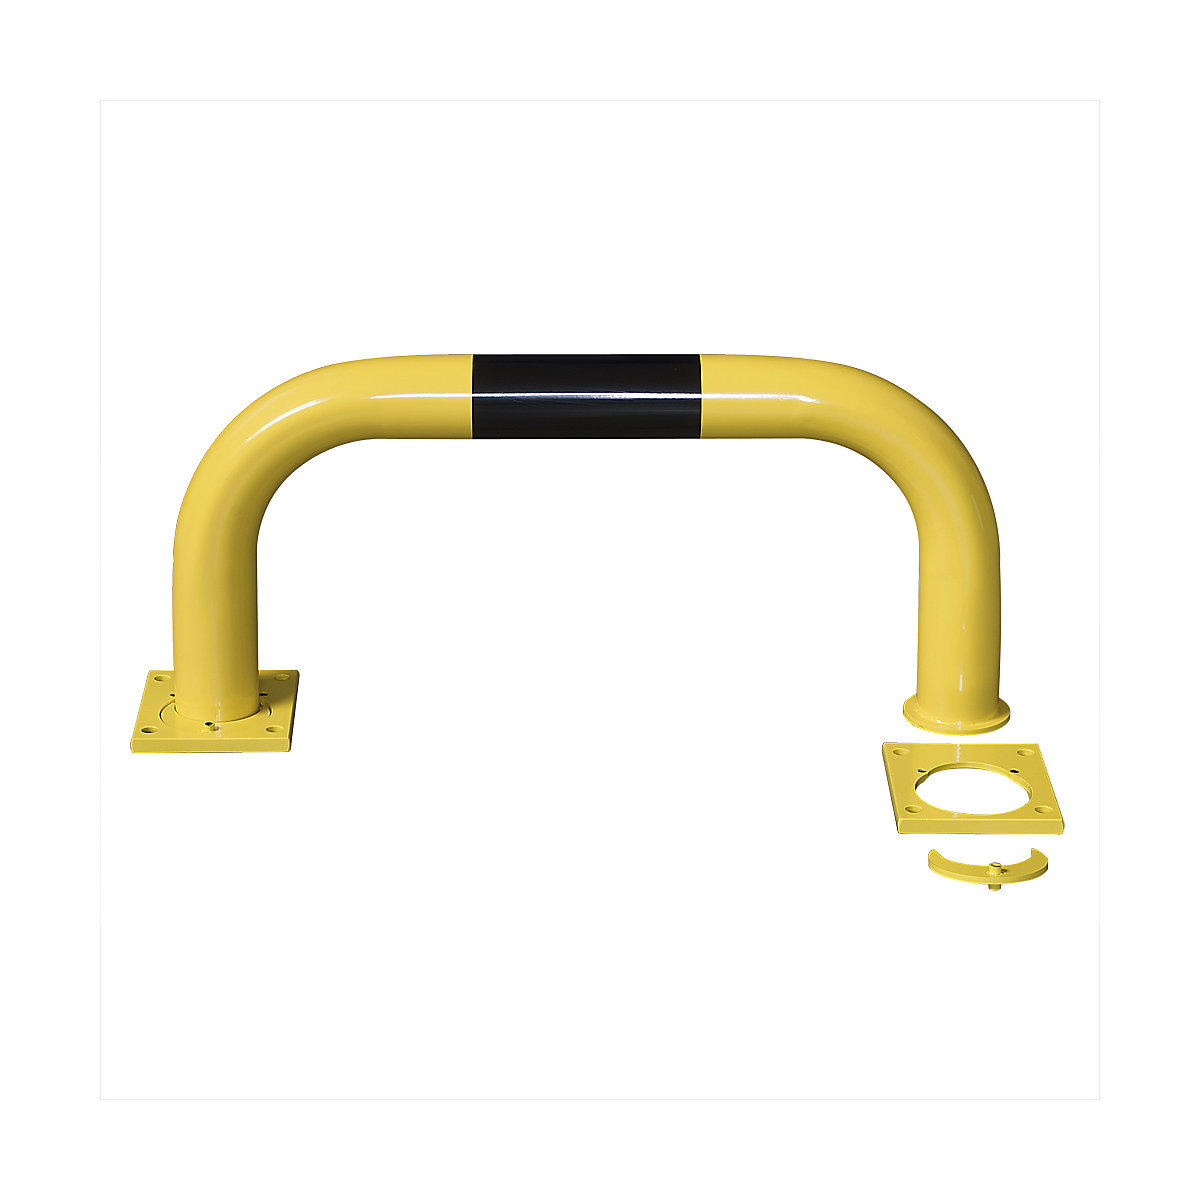 Crash protection bar, easy to disassemble